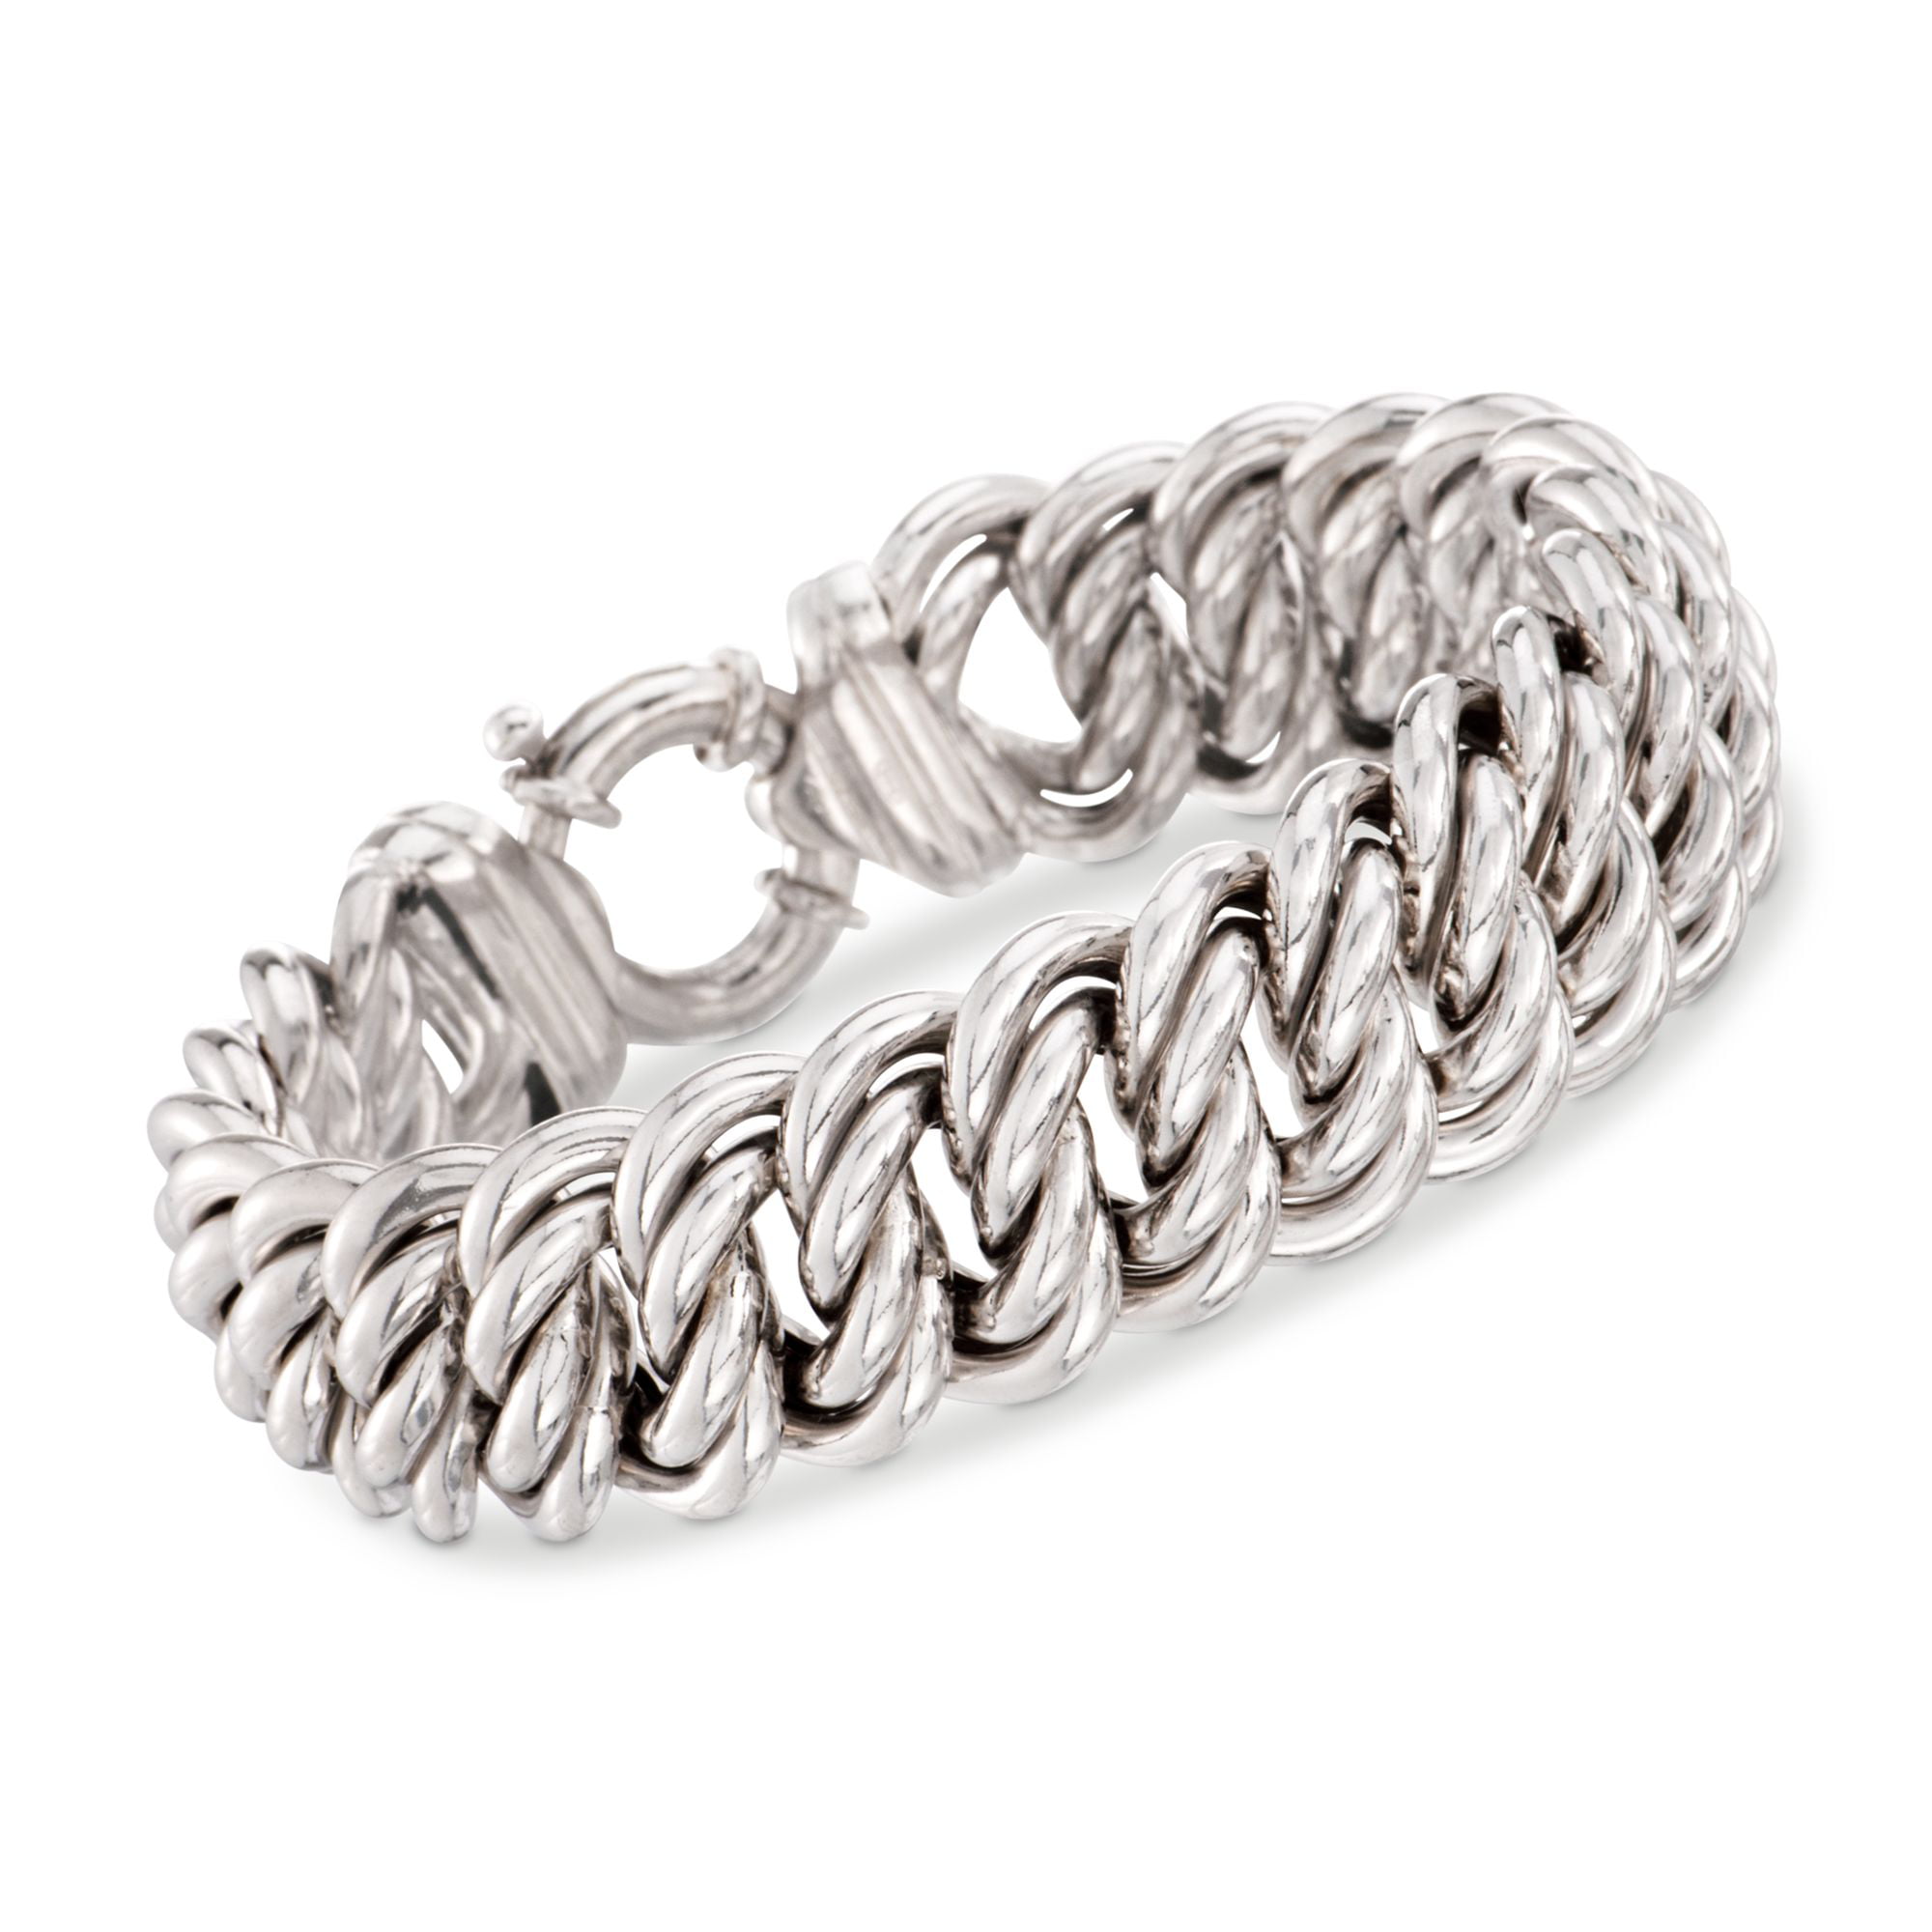 REAL STERLING SILVER Double Animal Head Design Braided Bangle Style BRACELET 